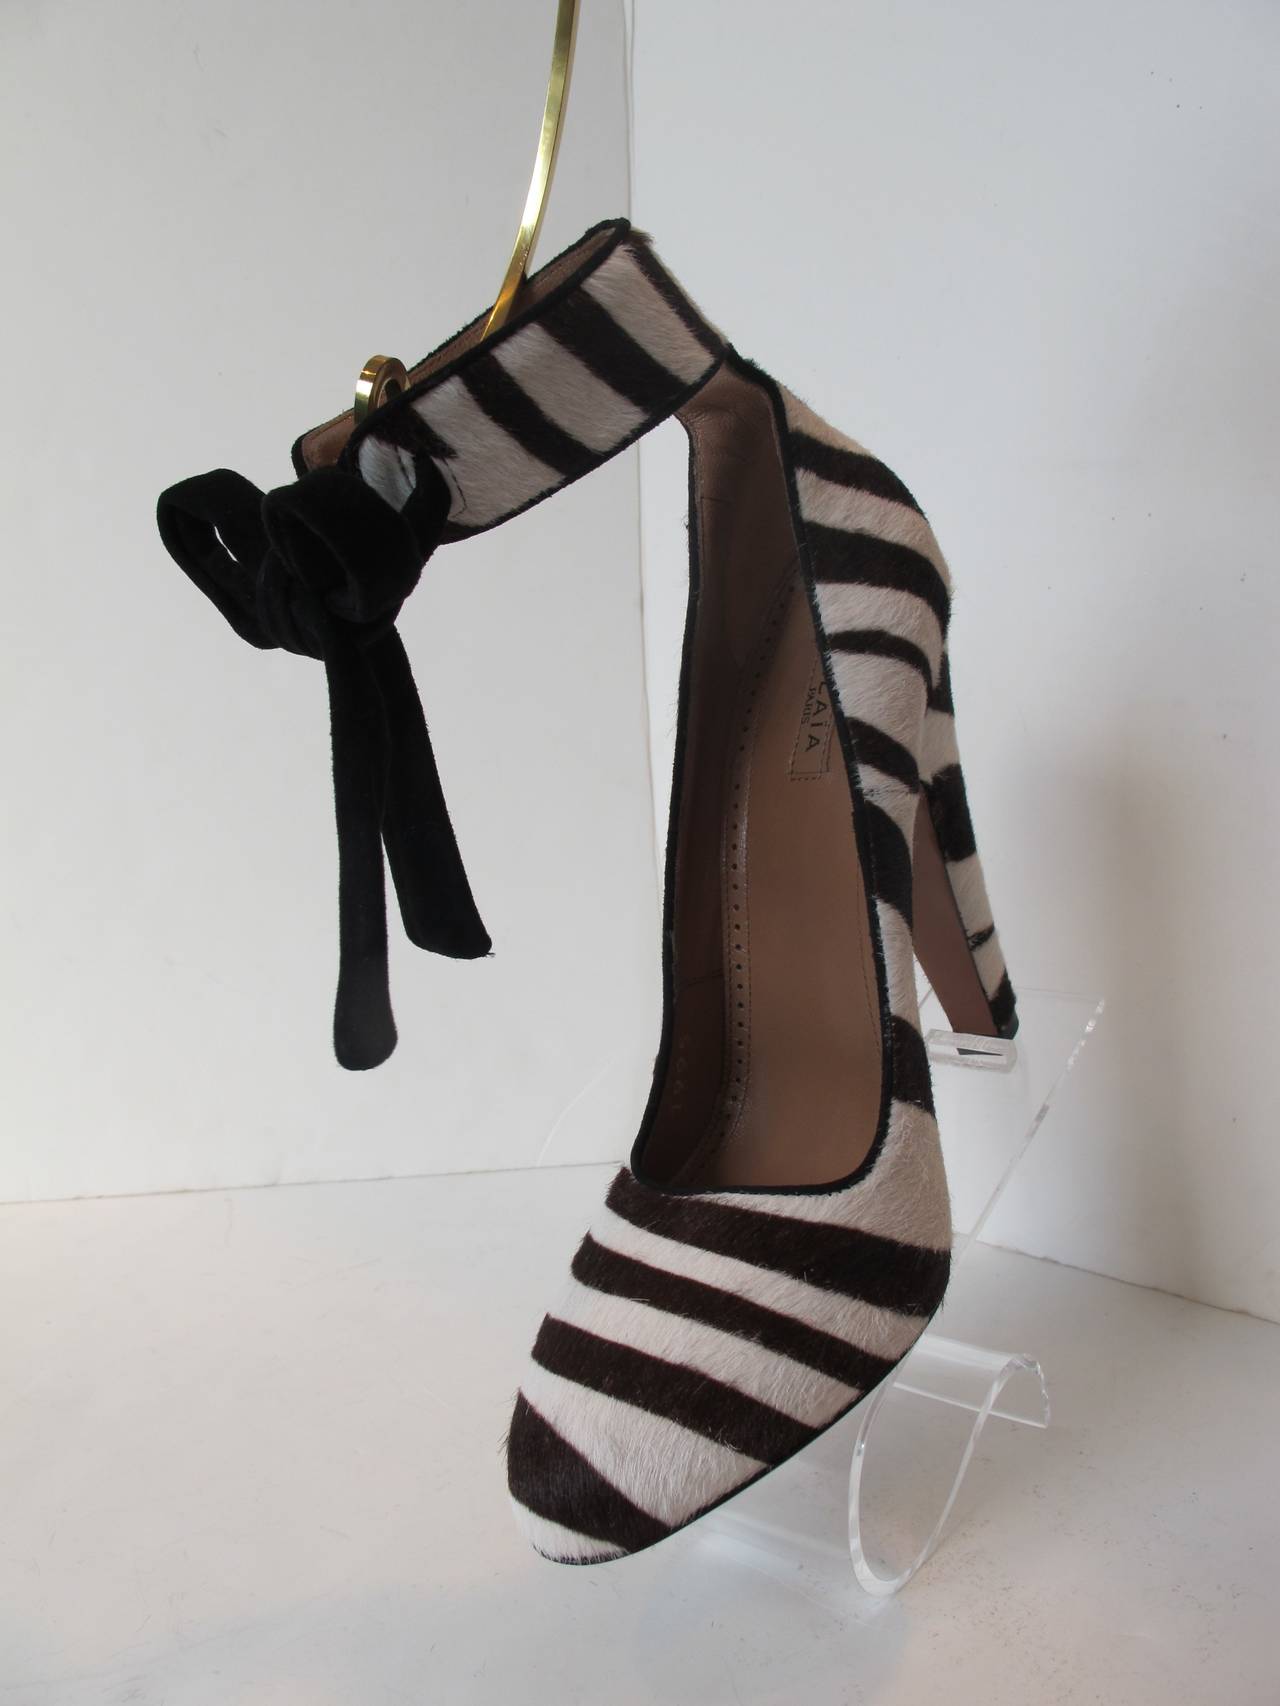 Impressive Alaia Zebra Shoes with Black Stripes. There is an ankle strap which ties with a black suede bow. Heel height is 5.125 inches. The design is 